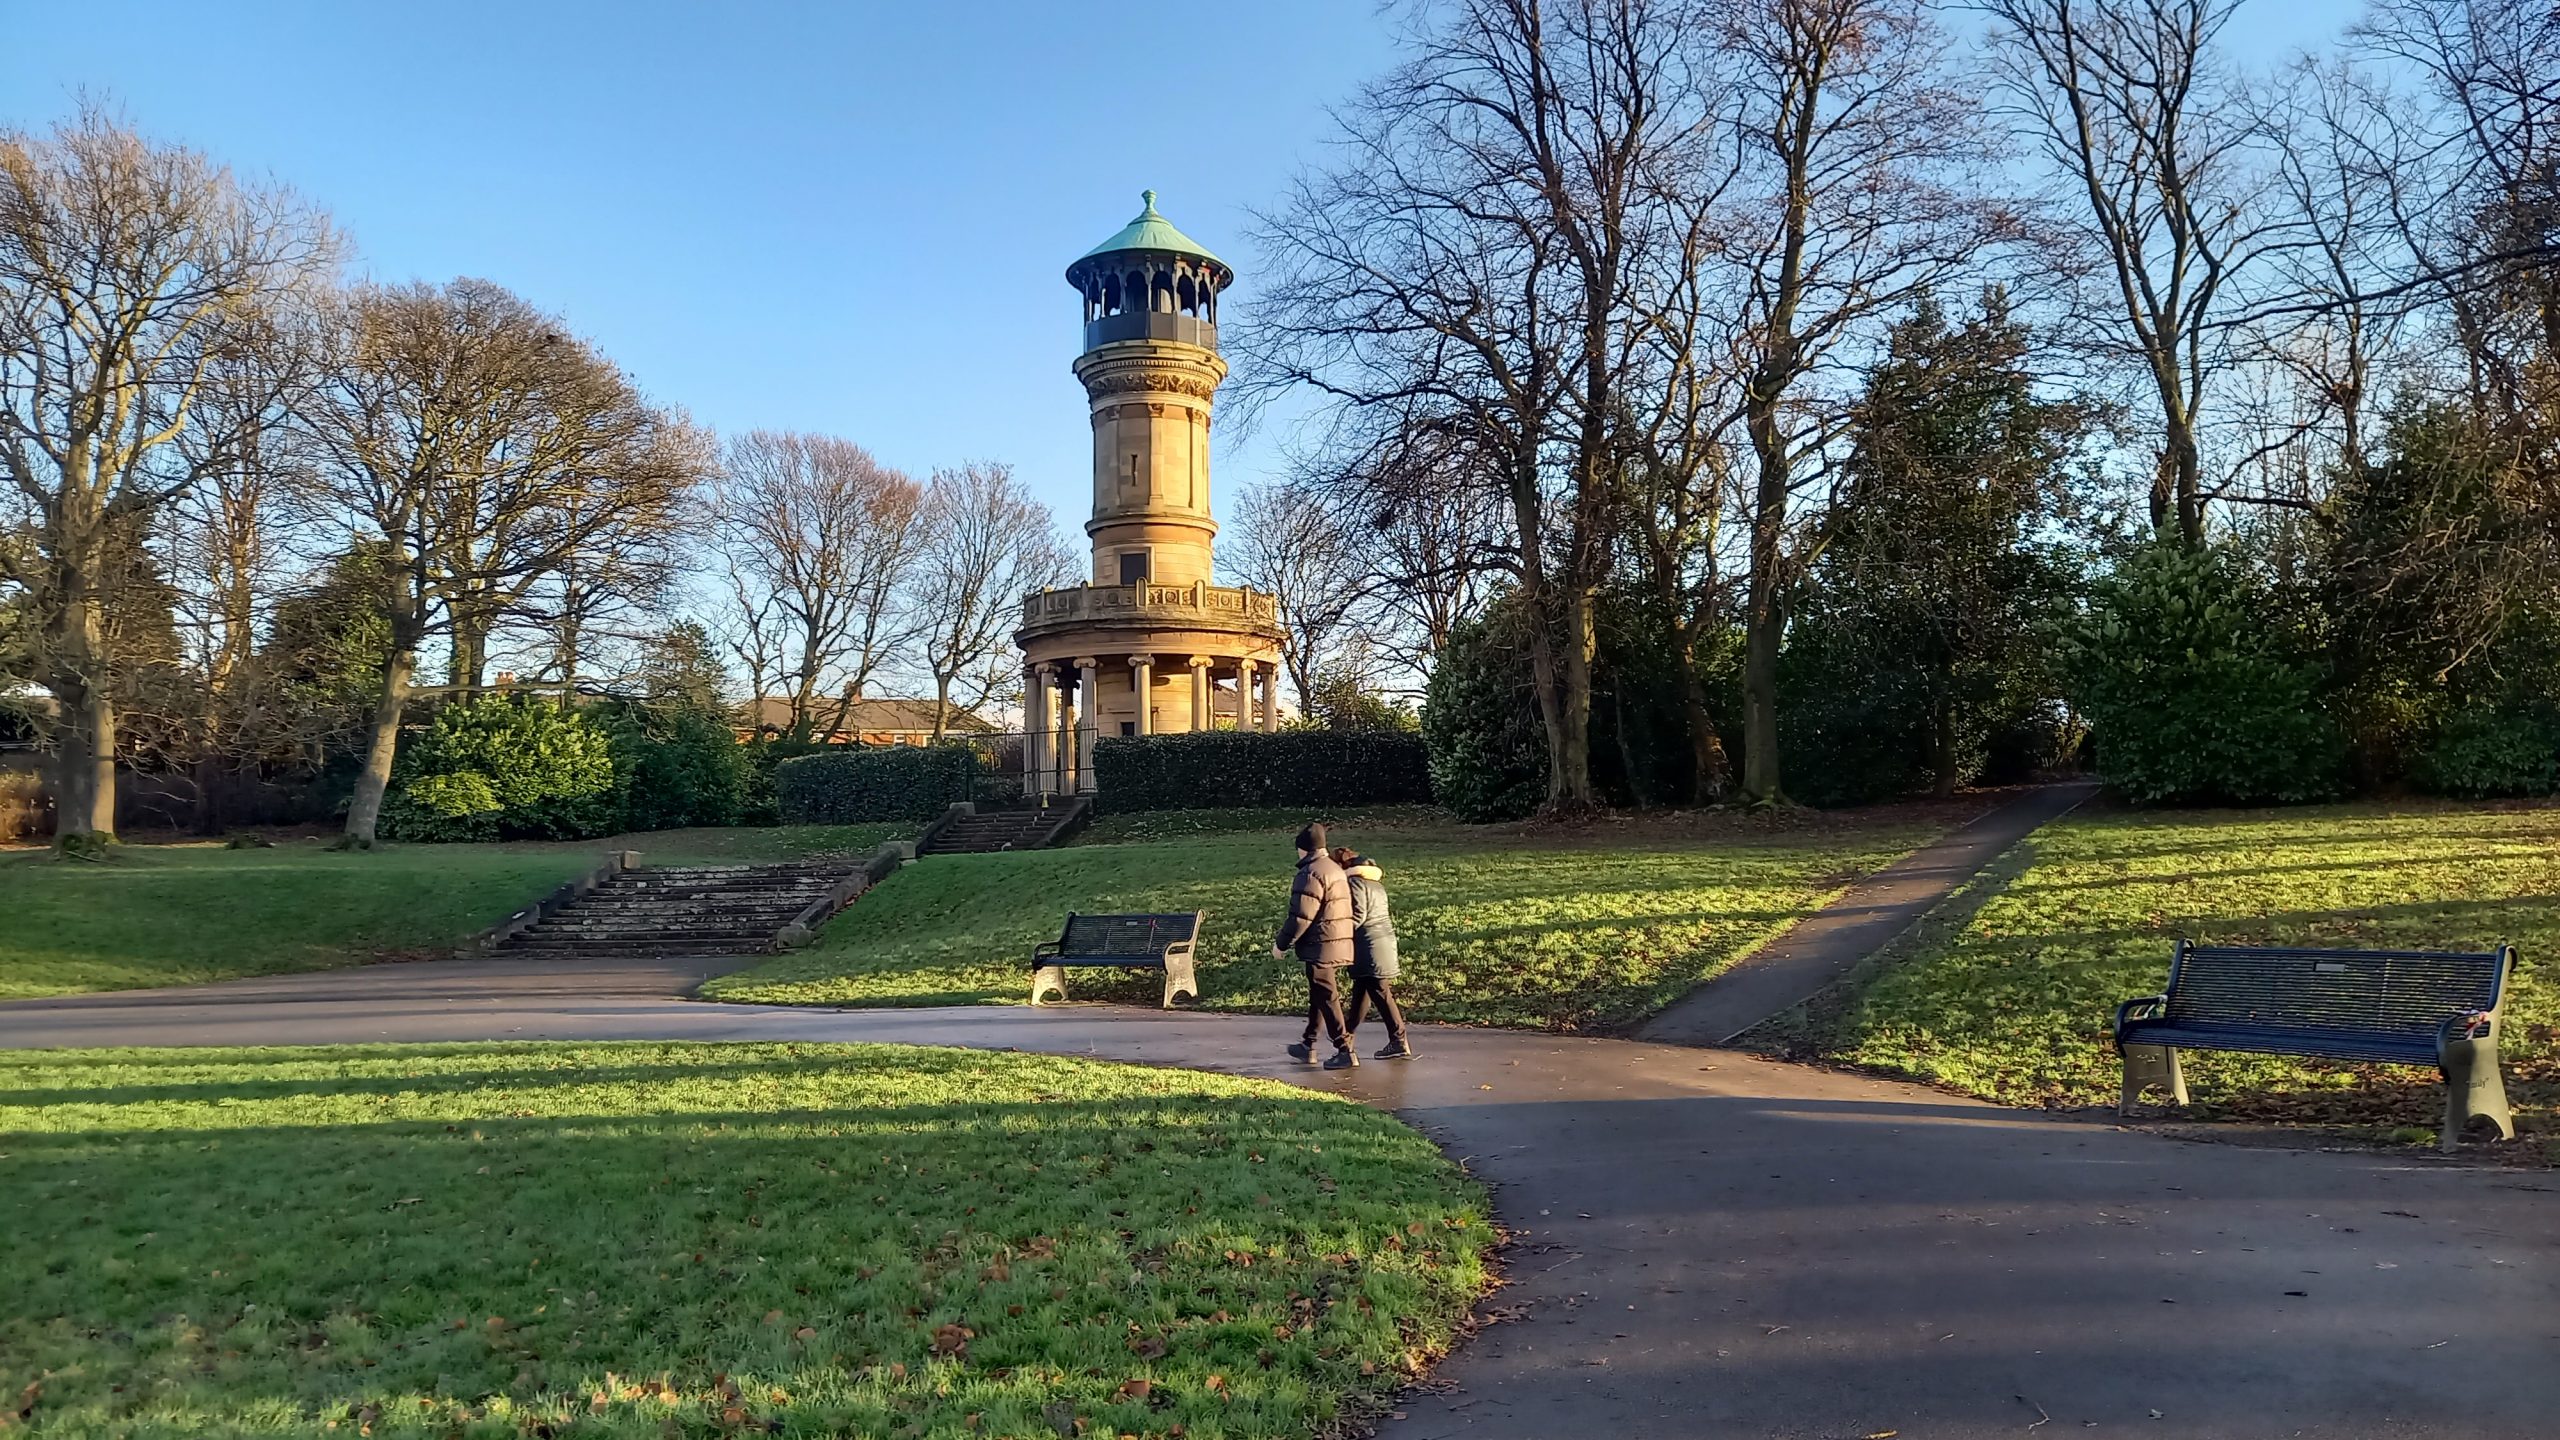 View of Locke Park tower lit by the late-Autumn sun amongst trees bare of leaves